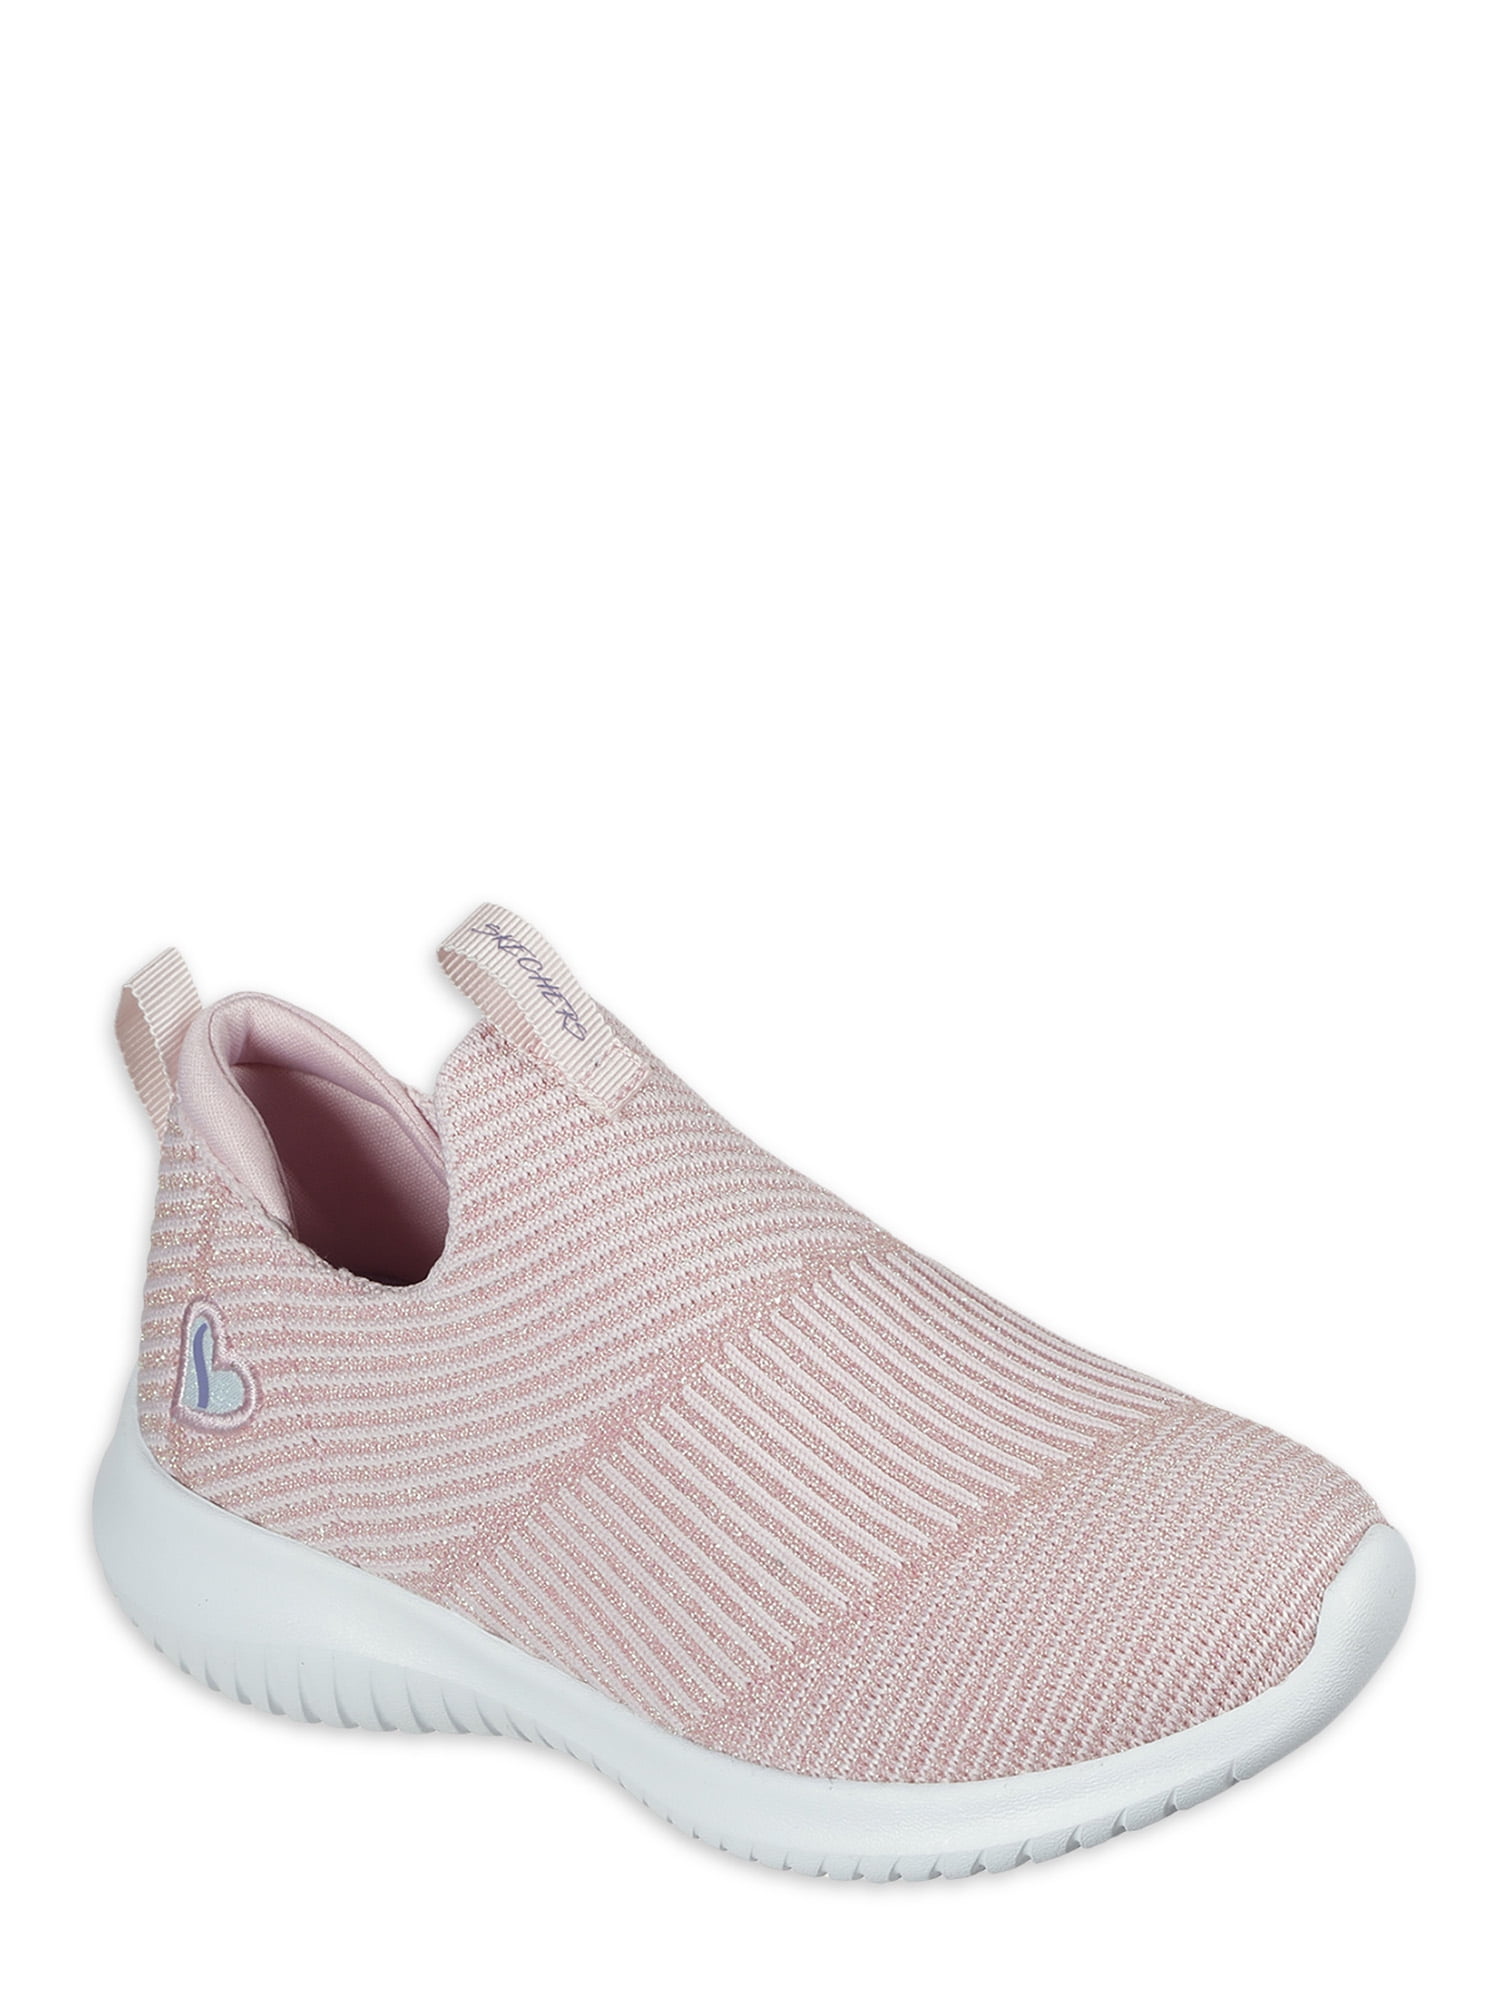 opportunity Canada Geography Skechers Ultra Flex Slip On Sneakers (Little Girl and Big Girl) -  Walmart.com